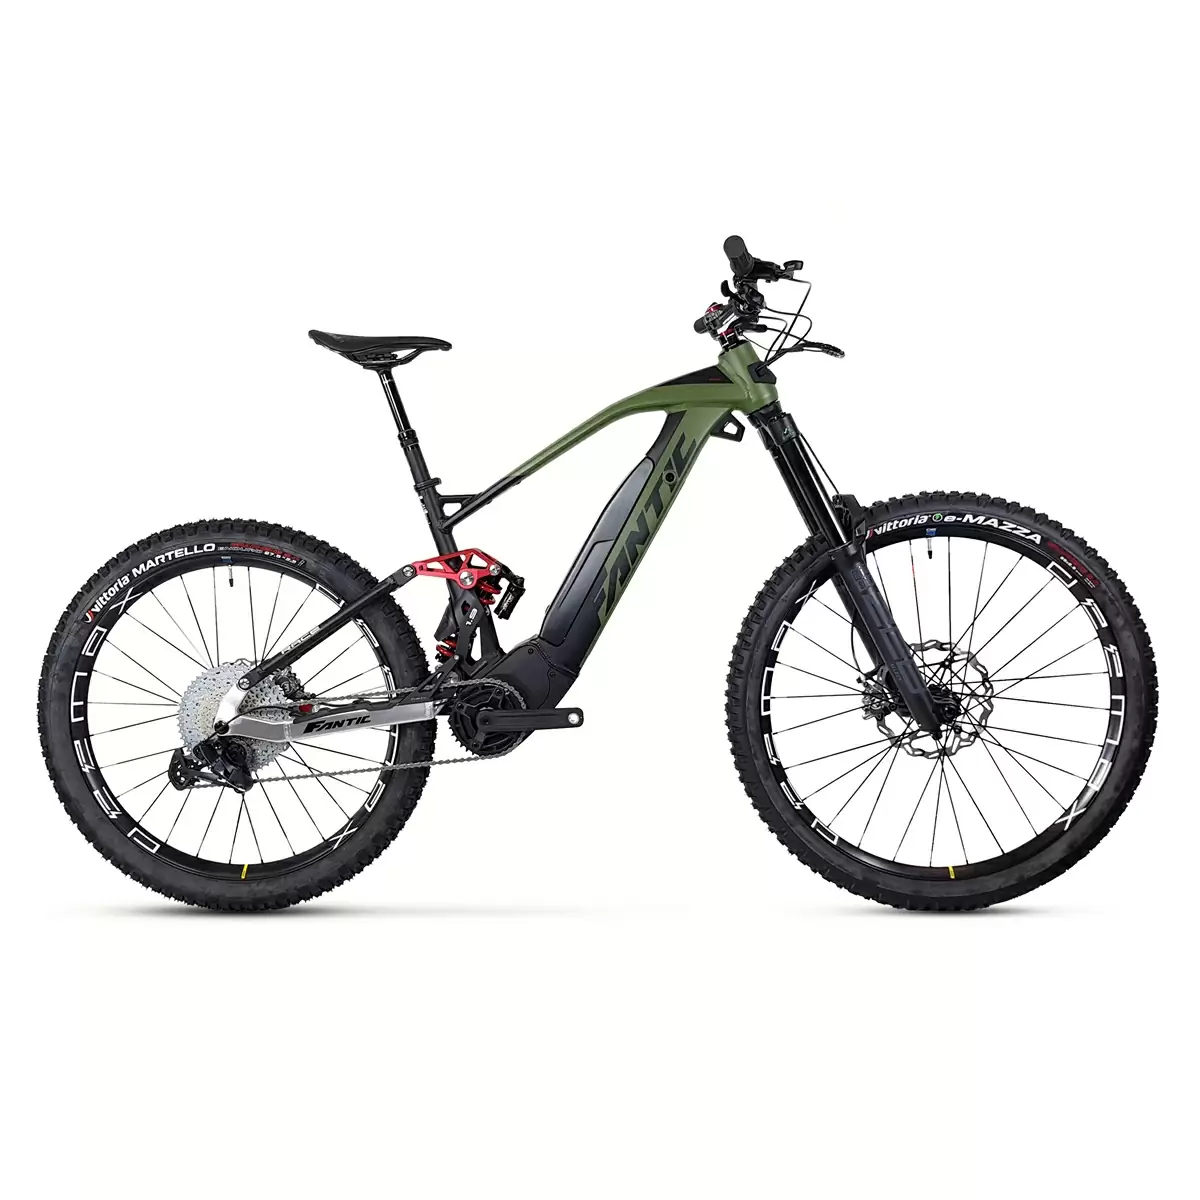 Integra XEF 1.9 Race 29''/27.5'' 190mm 12s 720wh Brose S-Mag Green 2022 Size S - image